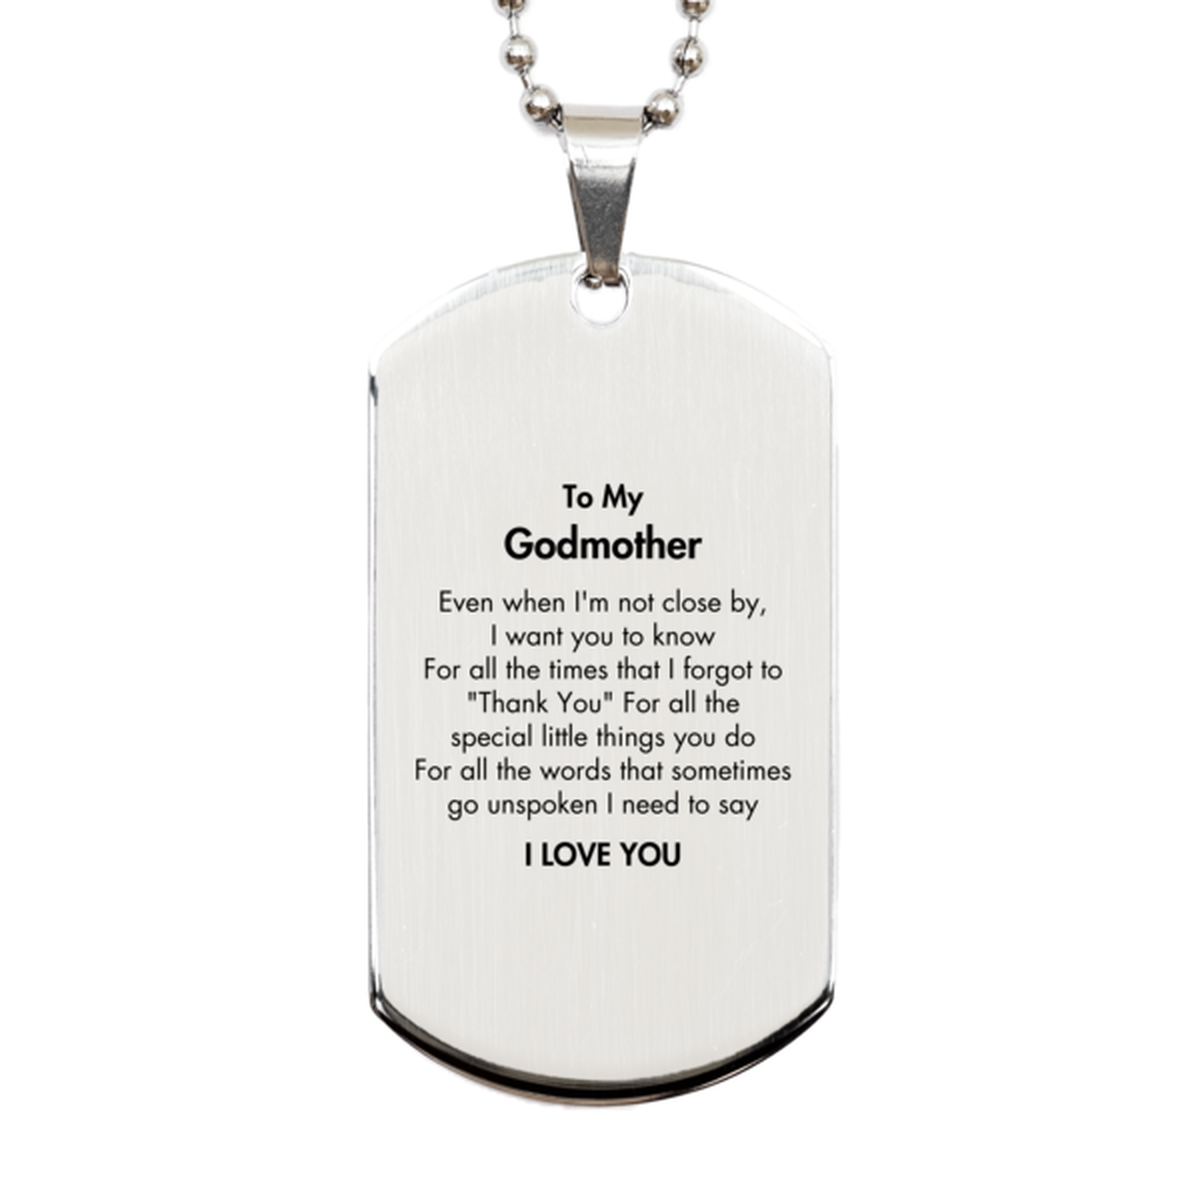 Thank You Gifts for Godmother, Keepsake Silver Dog Tag Gifts for Godmother Birthday Mother's day Father's Day Godmother For all the words That sometimes go unspoken I need to say I LOVE YOU